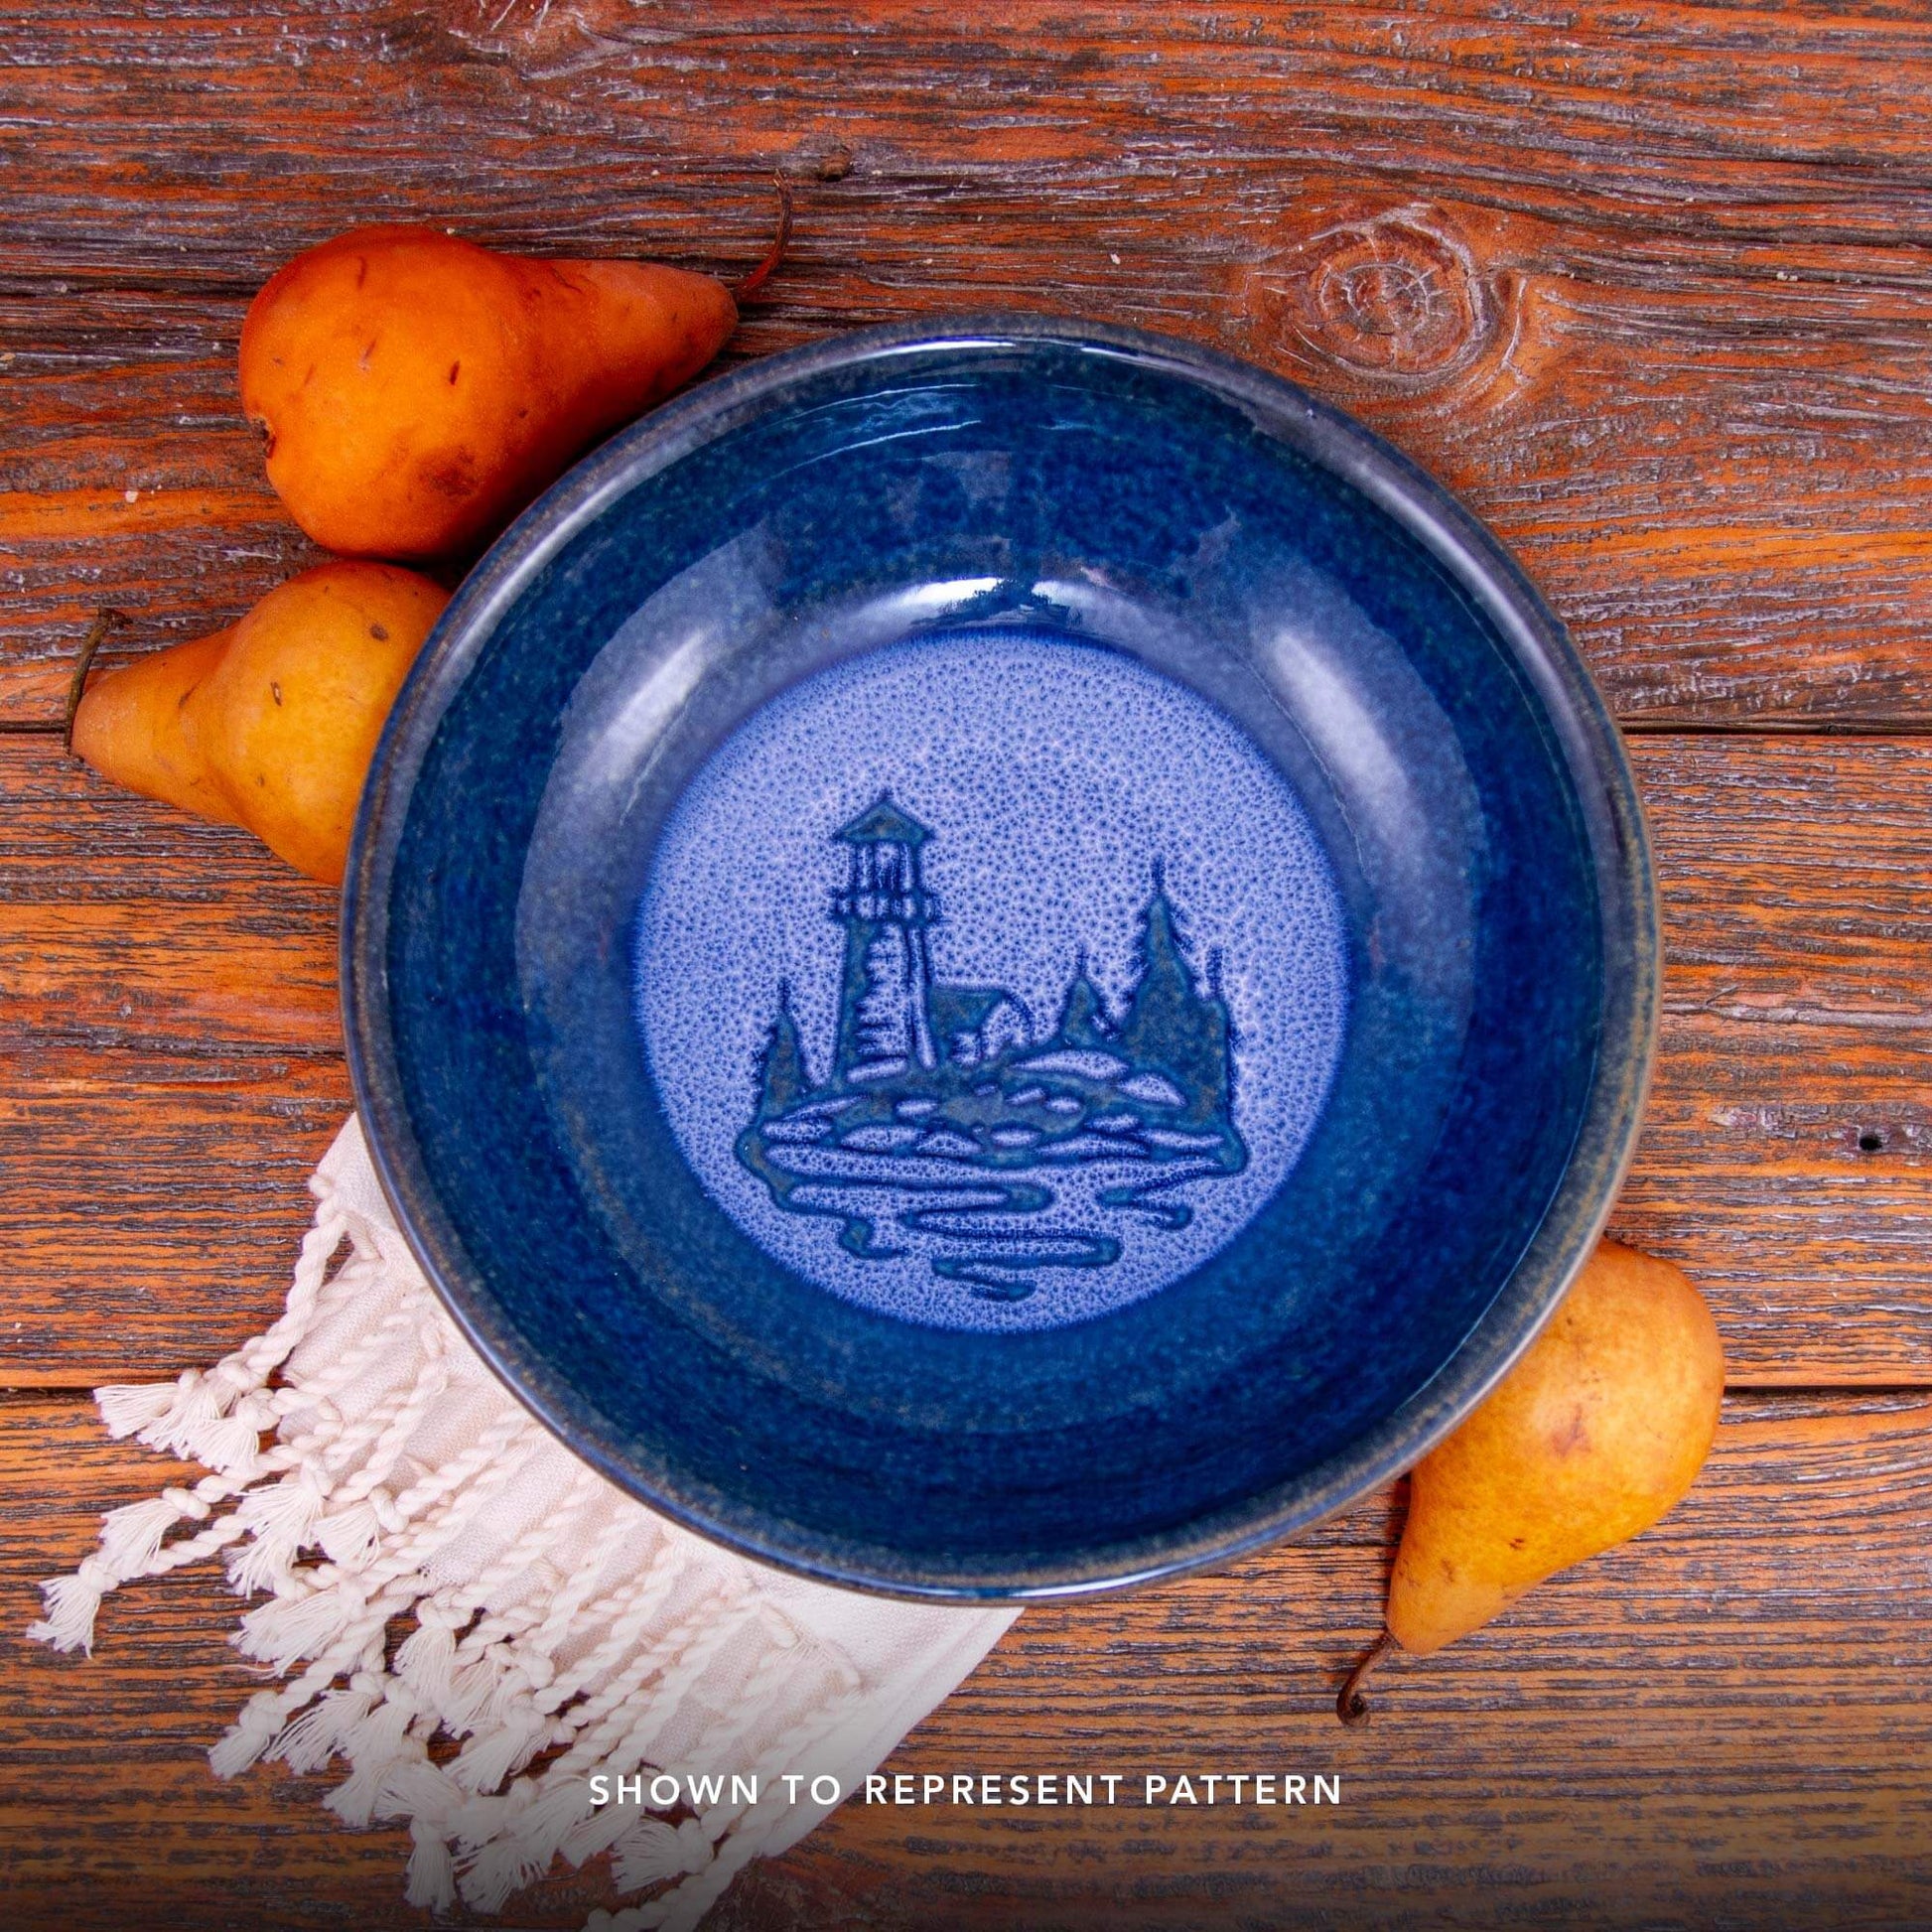 Handmade Pottery Harvest Bowl in Blue Lighthouse pattern made by Georgetown Pottery in Maine